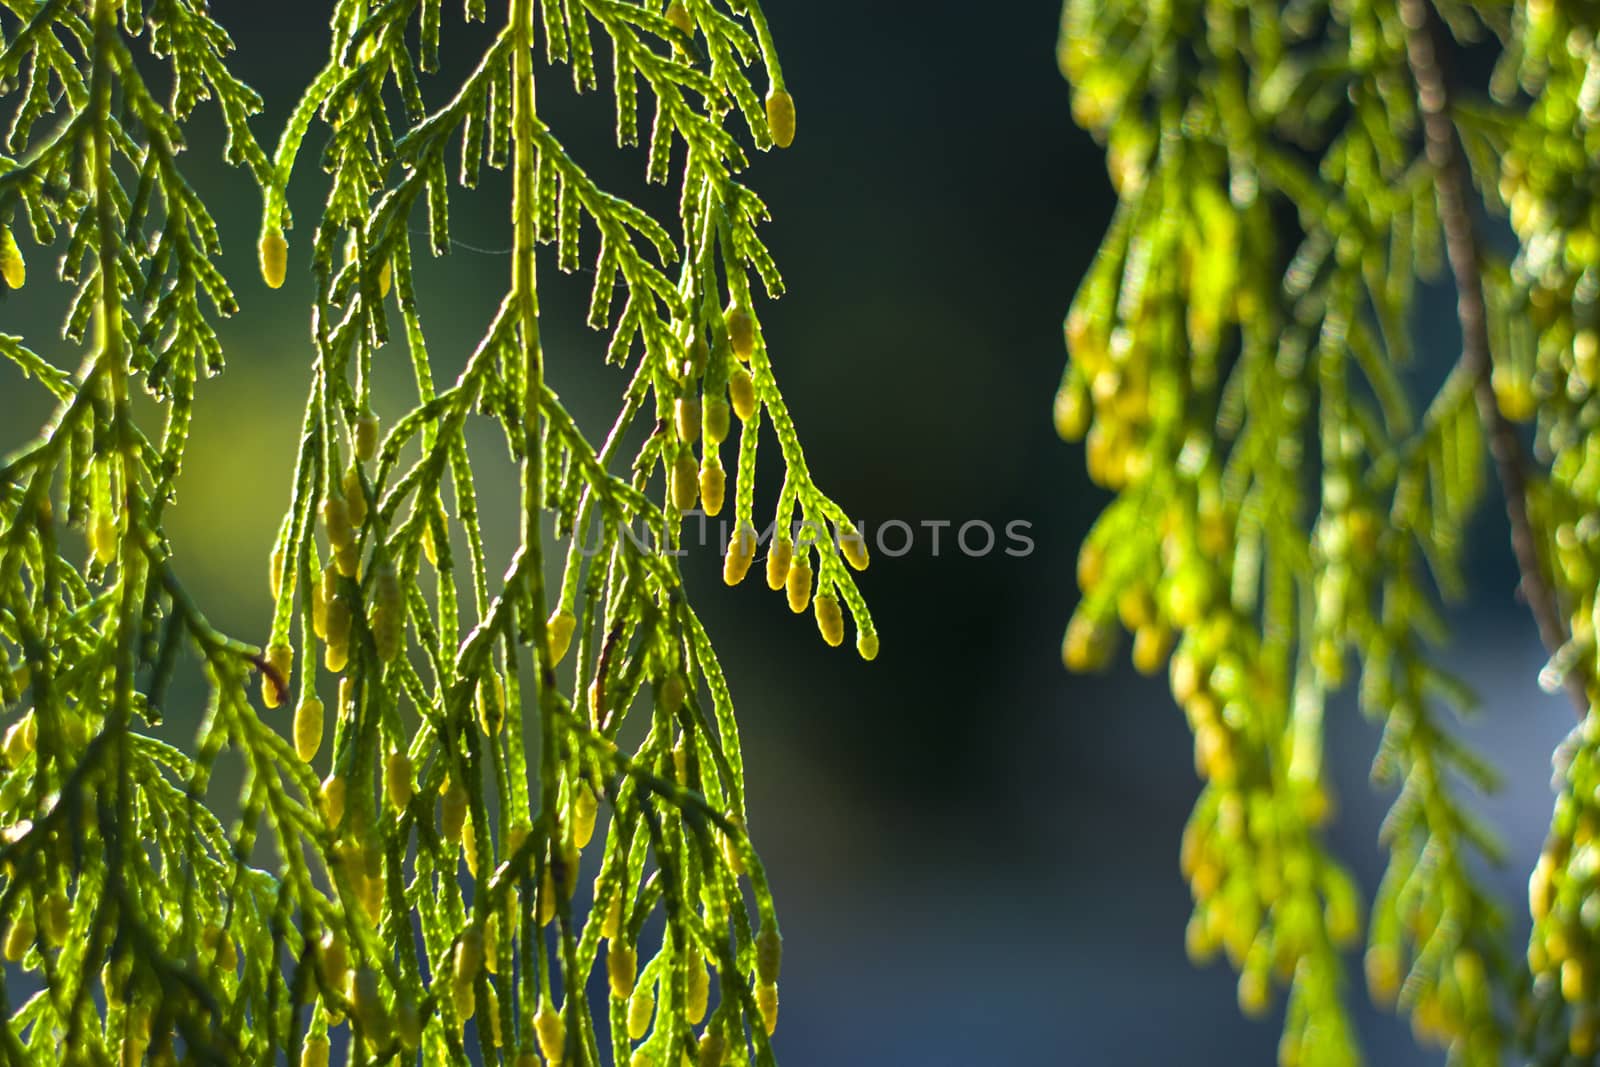 Pine tree leaves close-up and macro, green nature background, sunlight